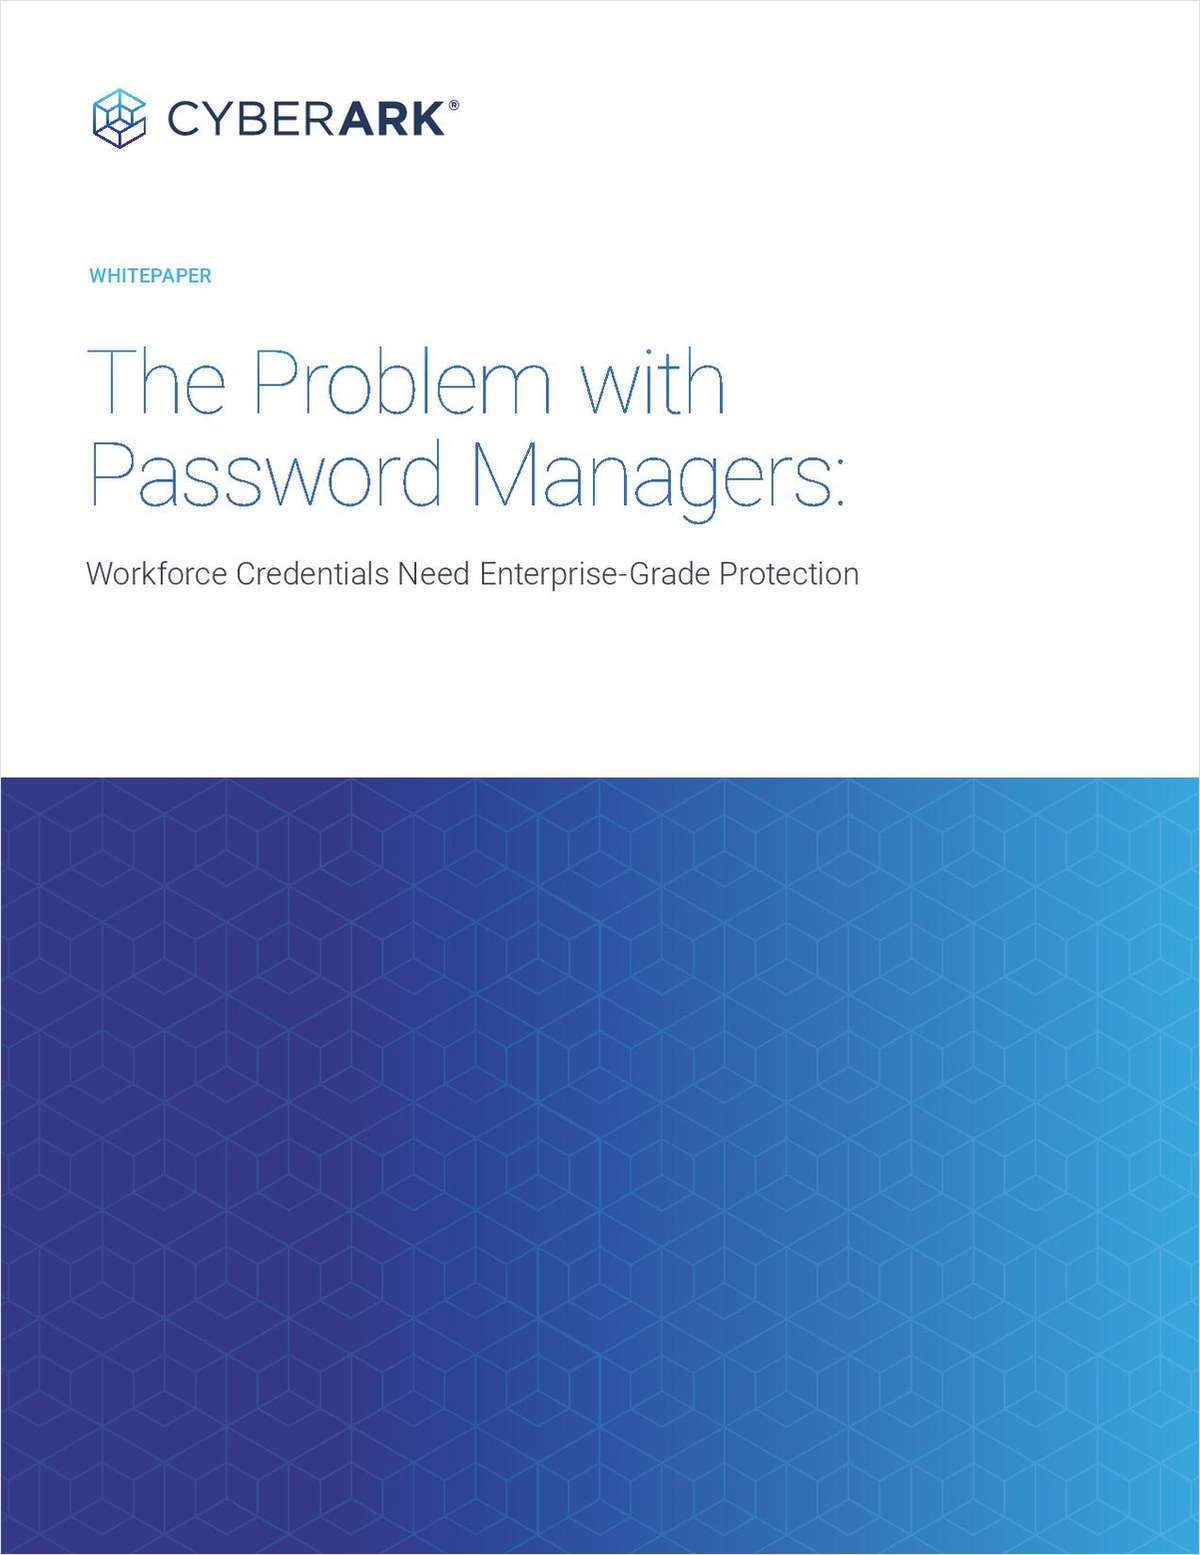 The Problem With Password Managers: Workforce Credentials Need Enterprise-Grade Protection